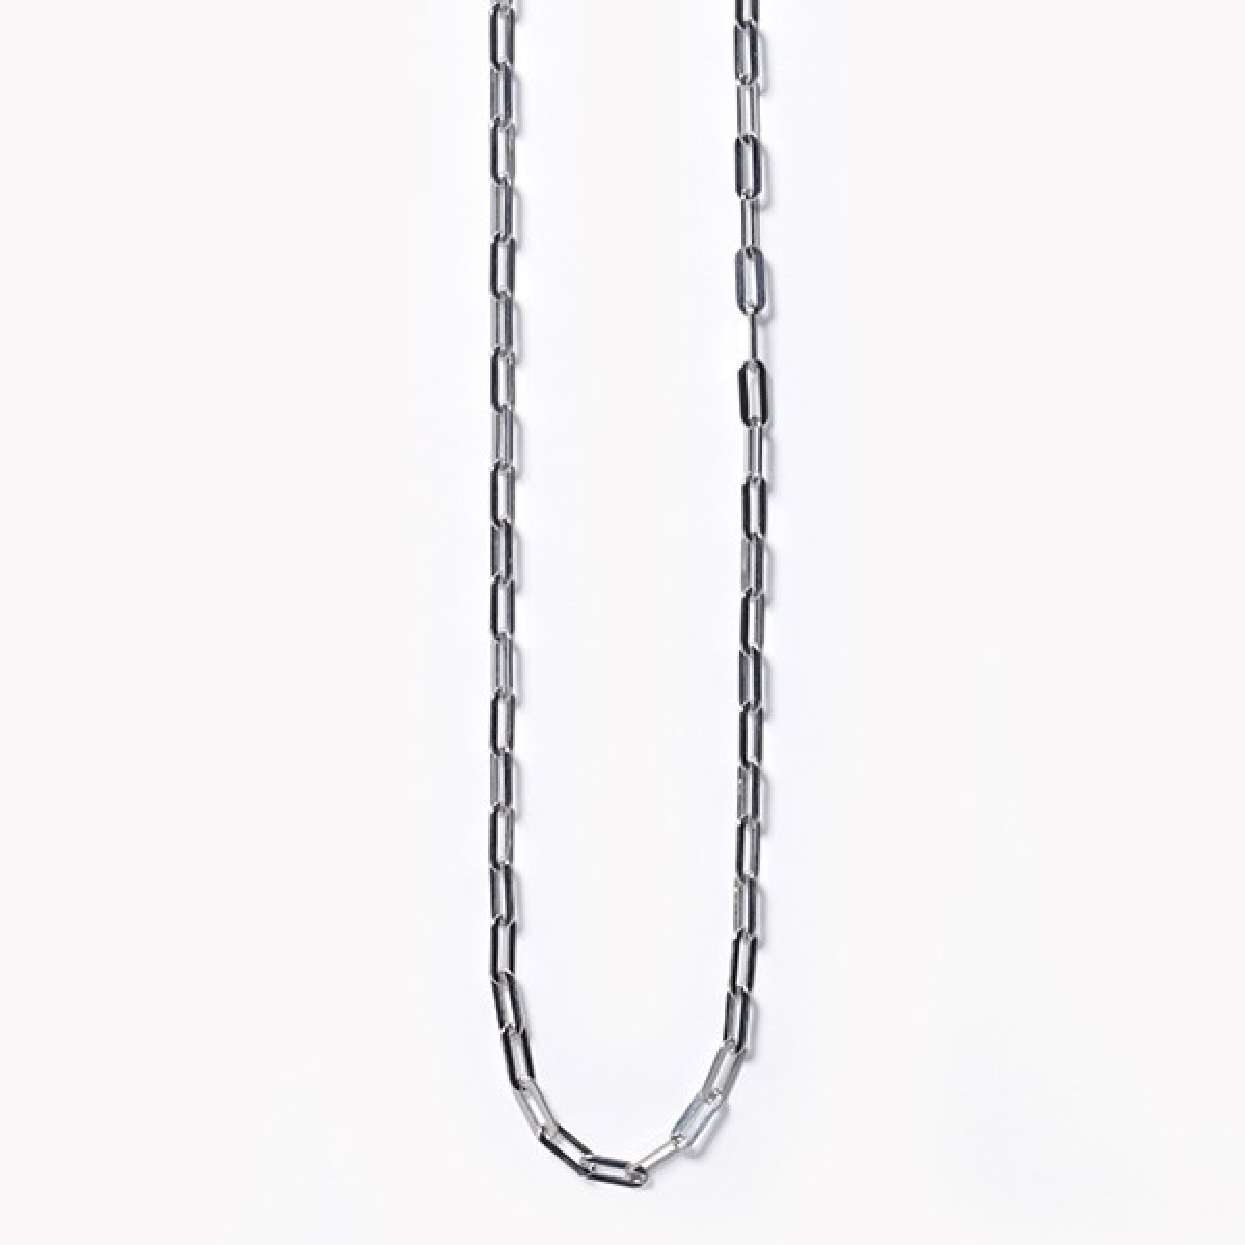 Southern Gates Sterling Silver Contemporary Rectangle Paperclip Necklace; 18 inches

KAR603/18